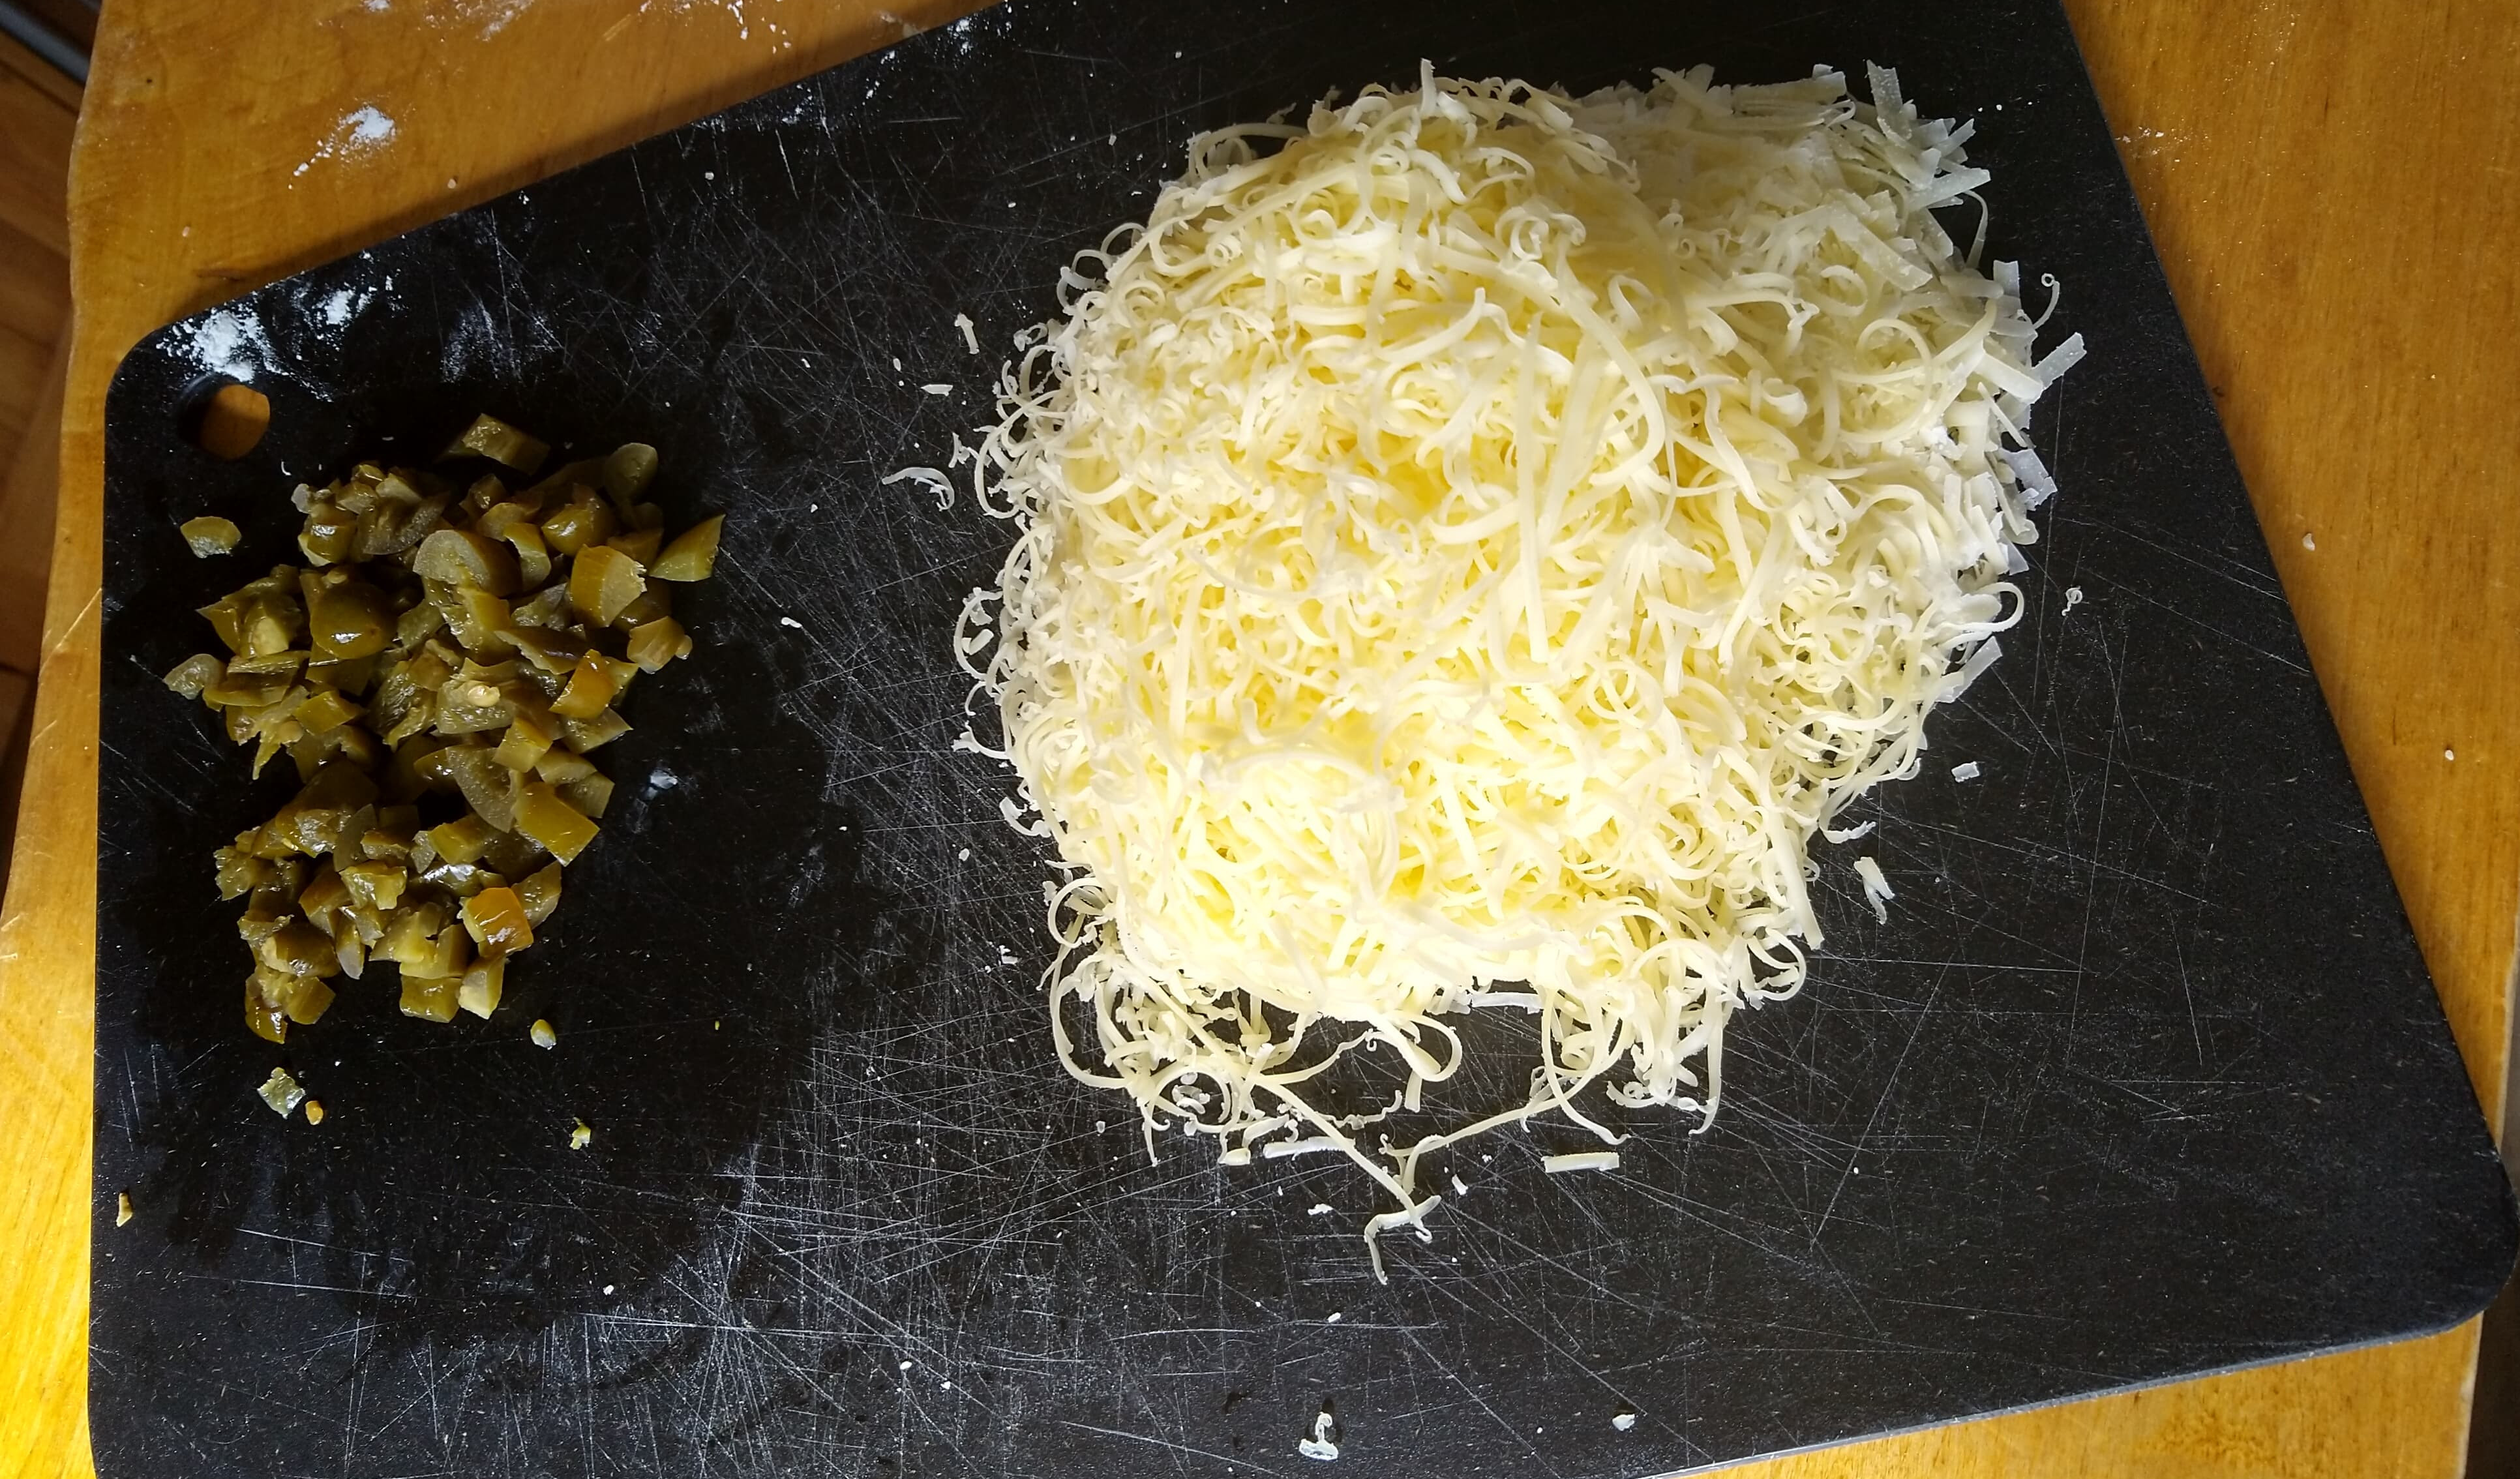 The jalapeño and cheese on the chopping board, ready to be introduced to the batter